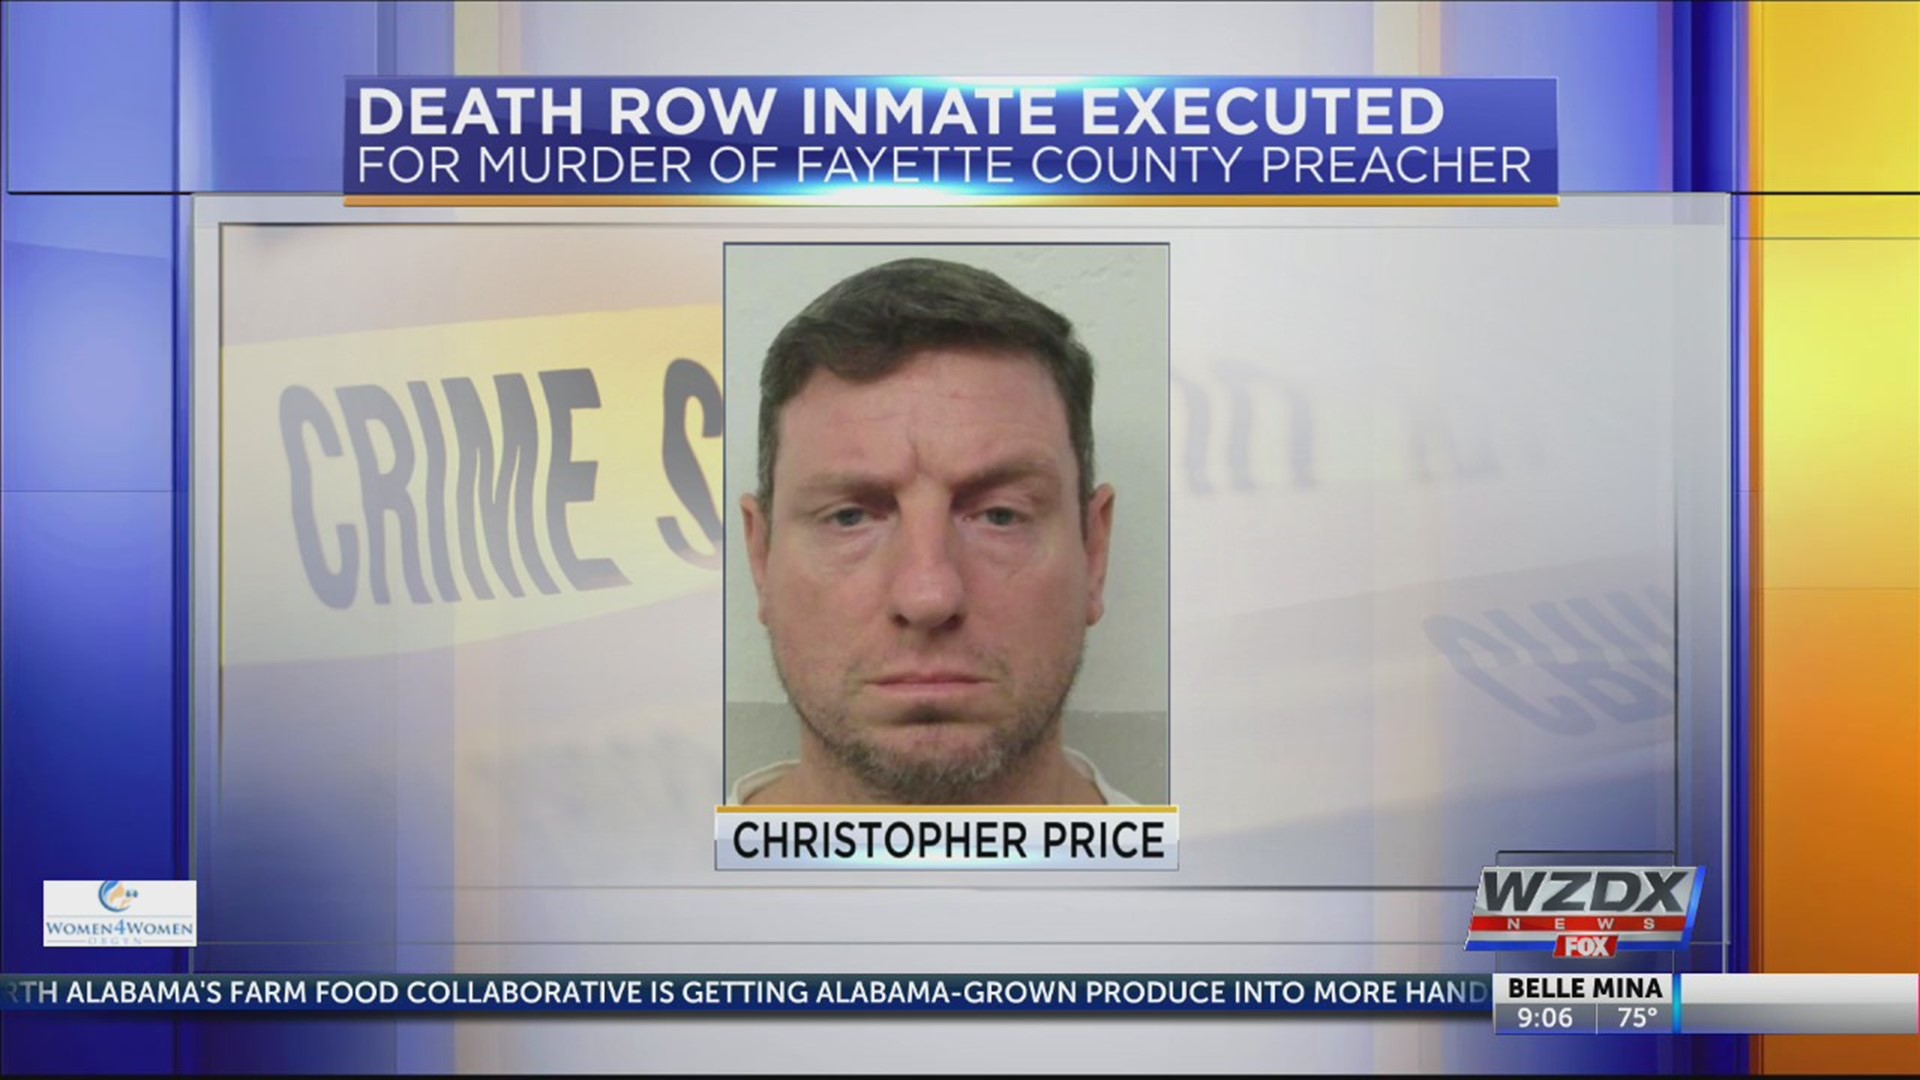 An Alabama death row inmate who killed a pastor in Fayette County was executed Thursday evening.